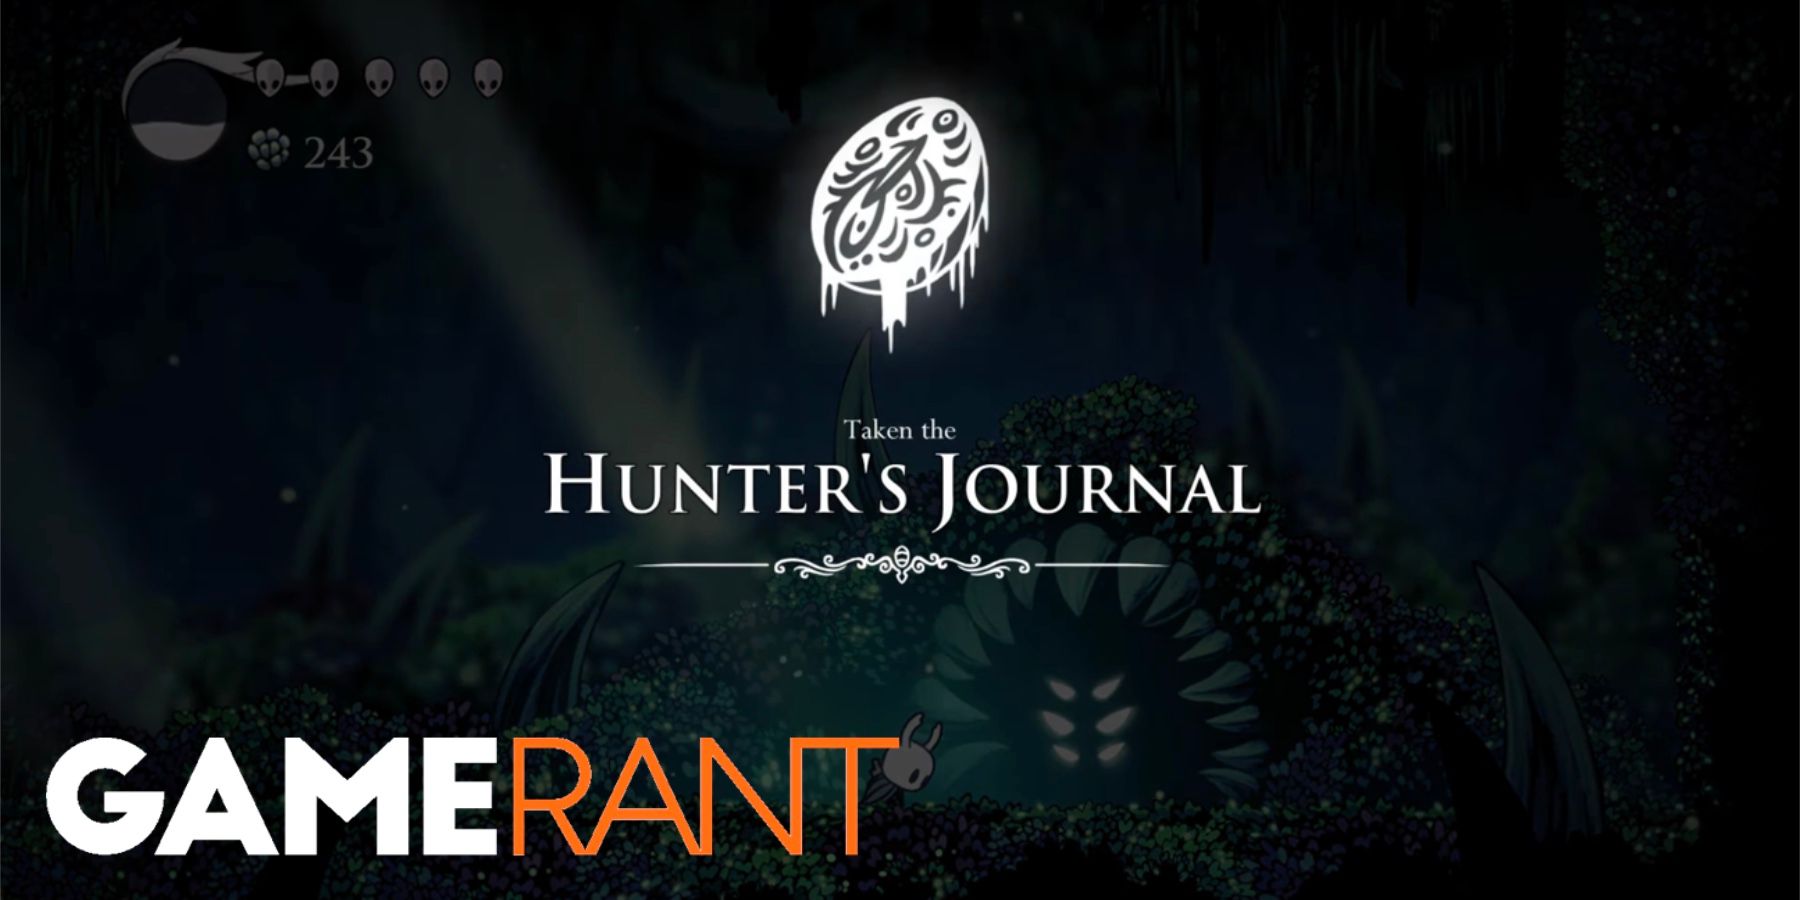 Hollow Knight receiving the Journal